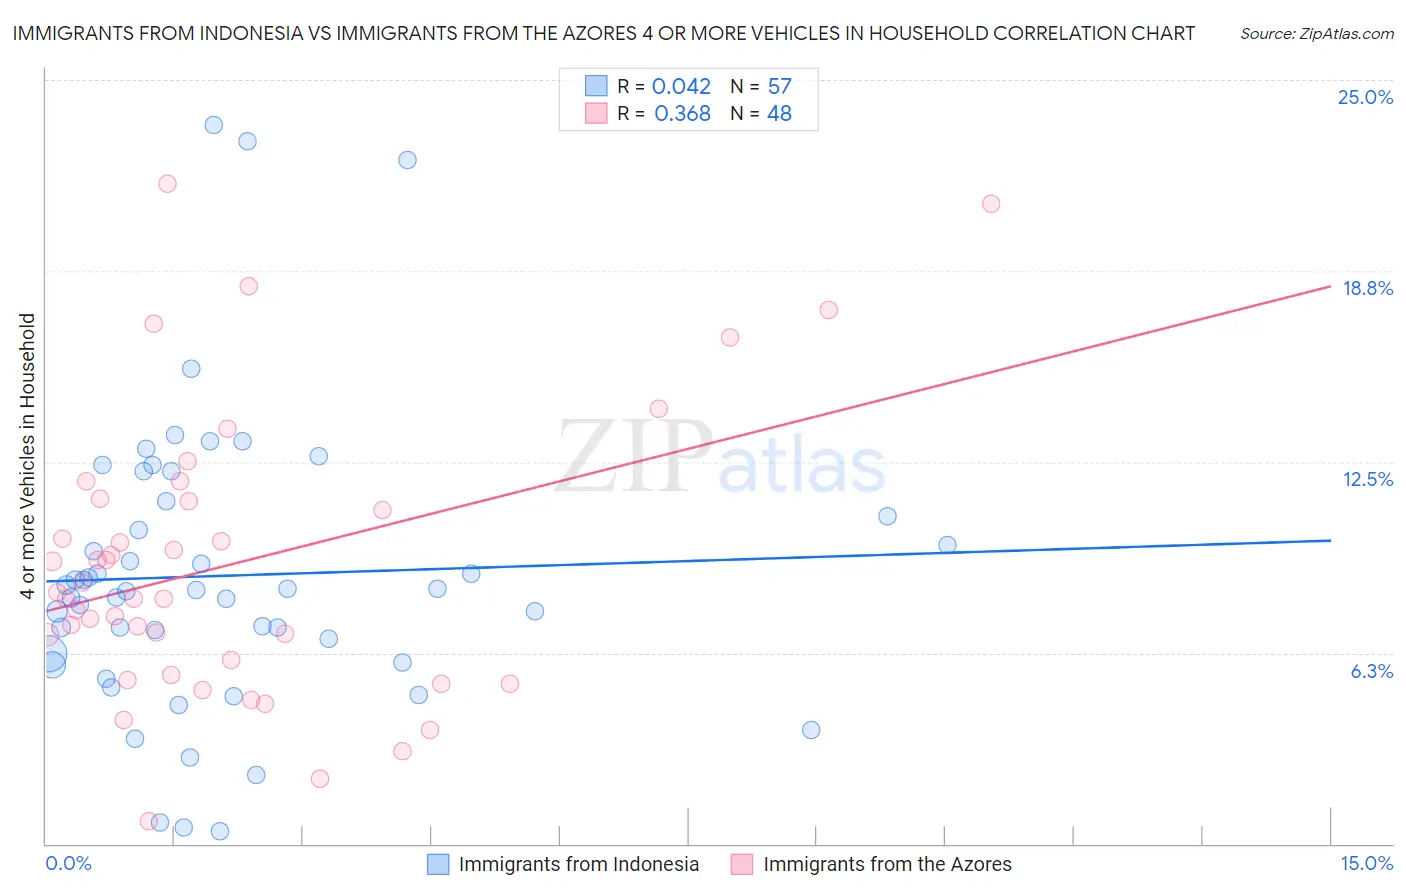 Immigrants from Indonesia vs Immigrants from the Azores 4 or more Vehicles in Household